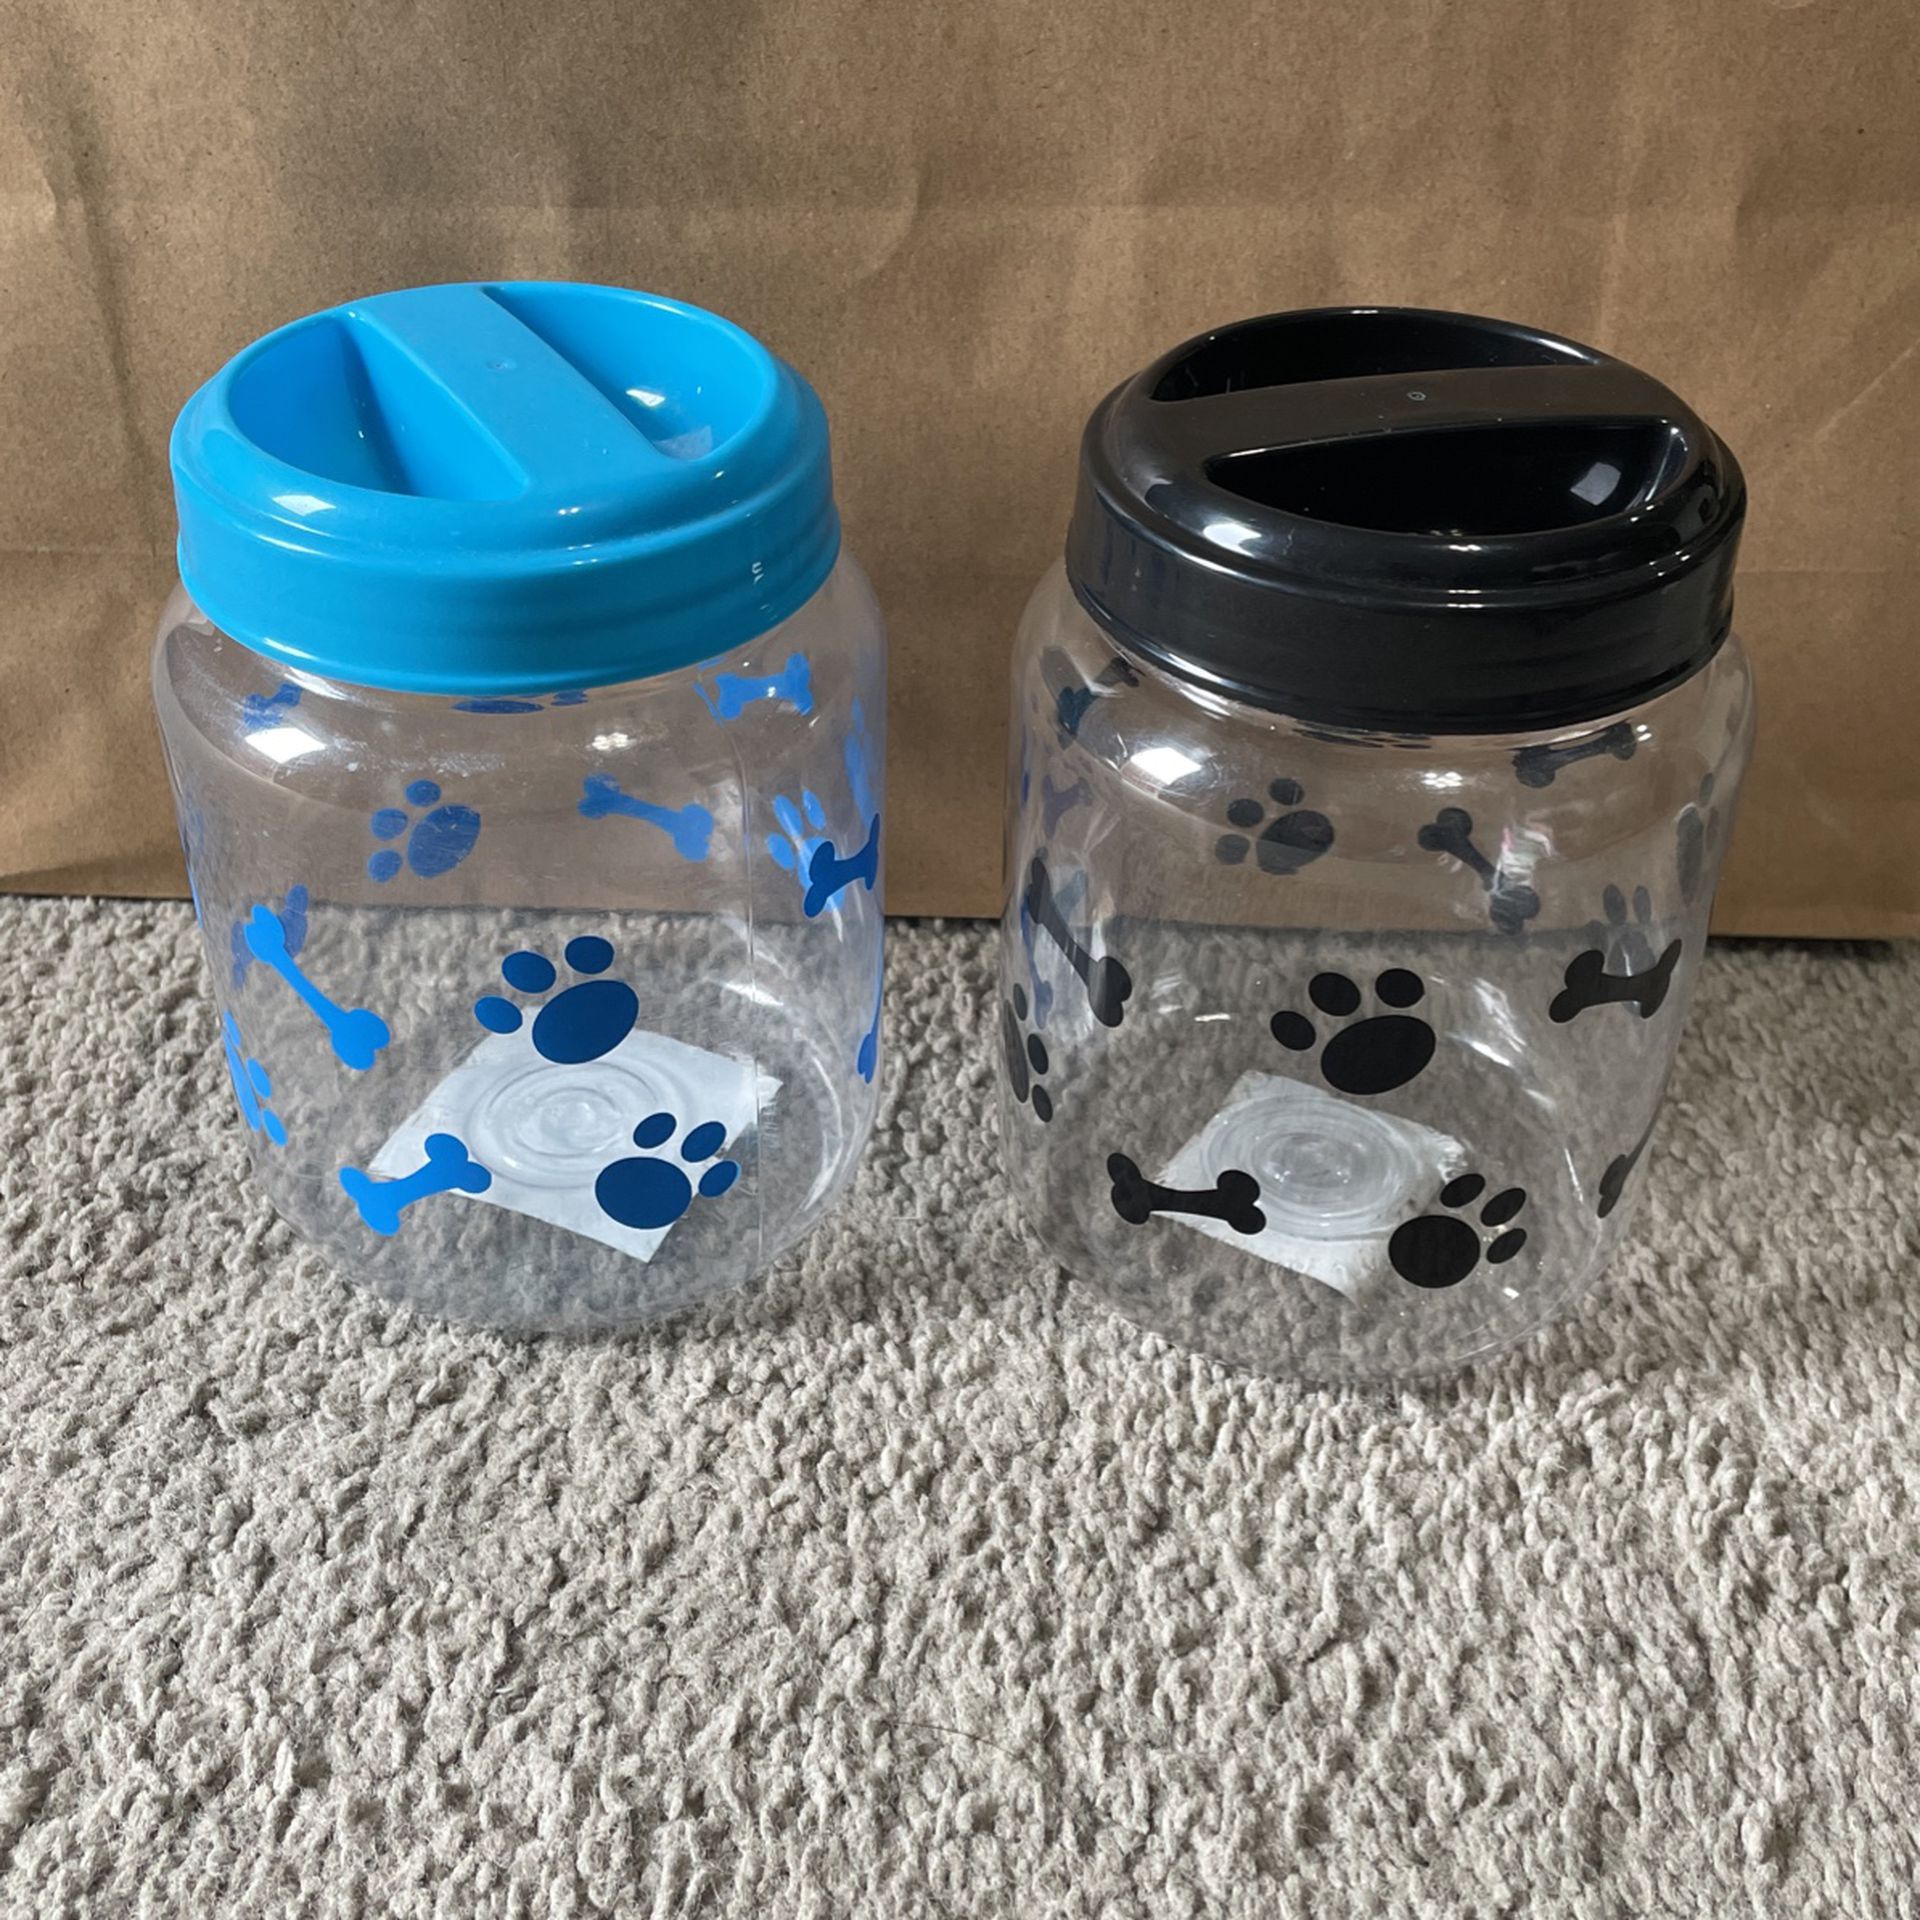 Dog food/treat containers